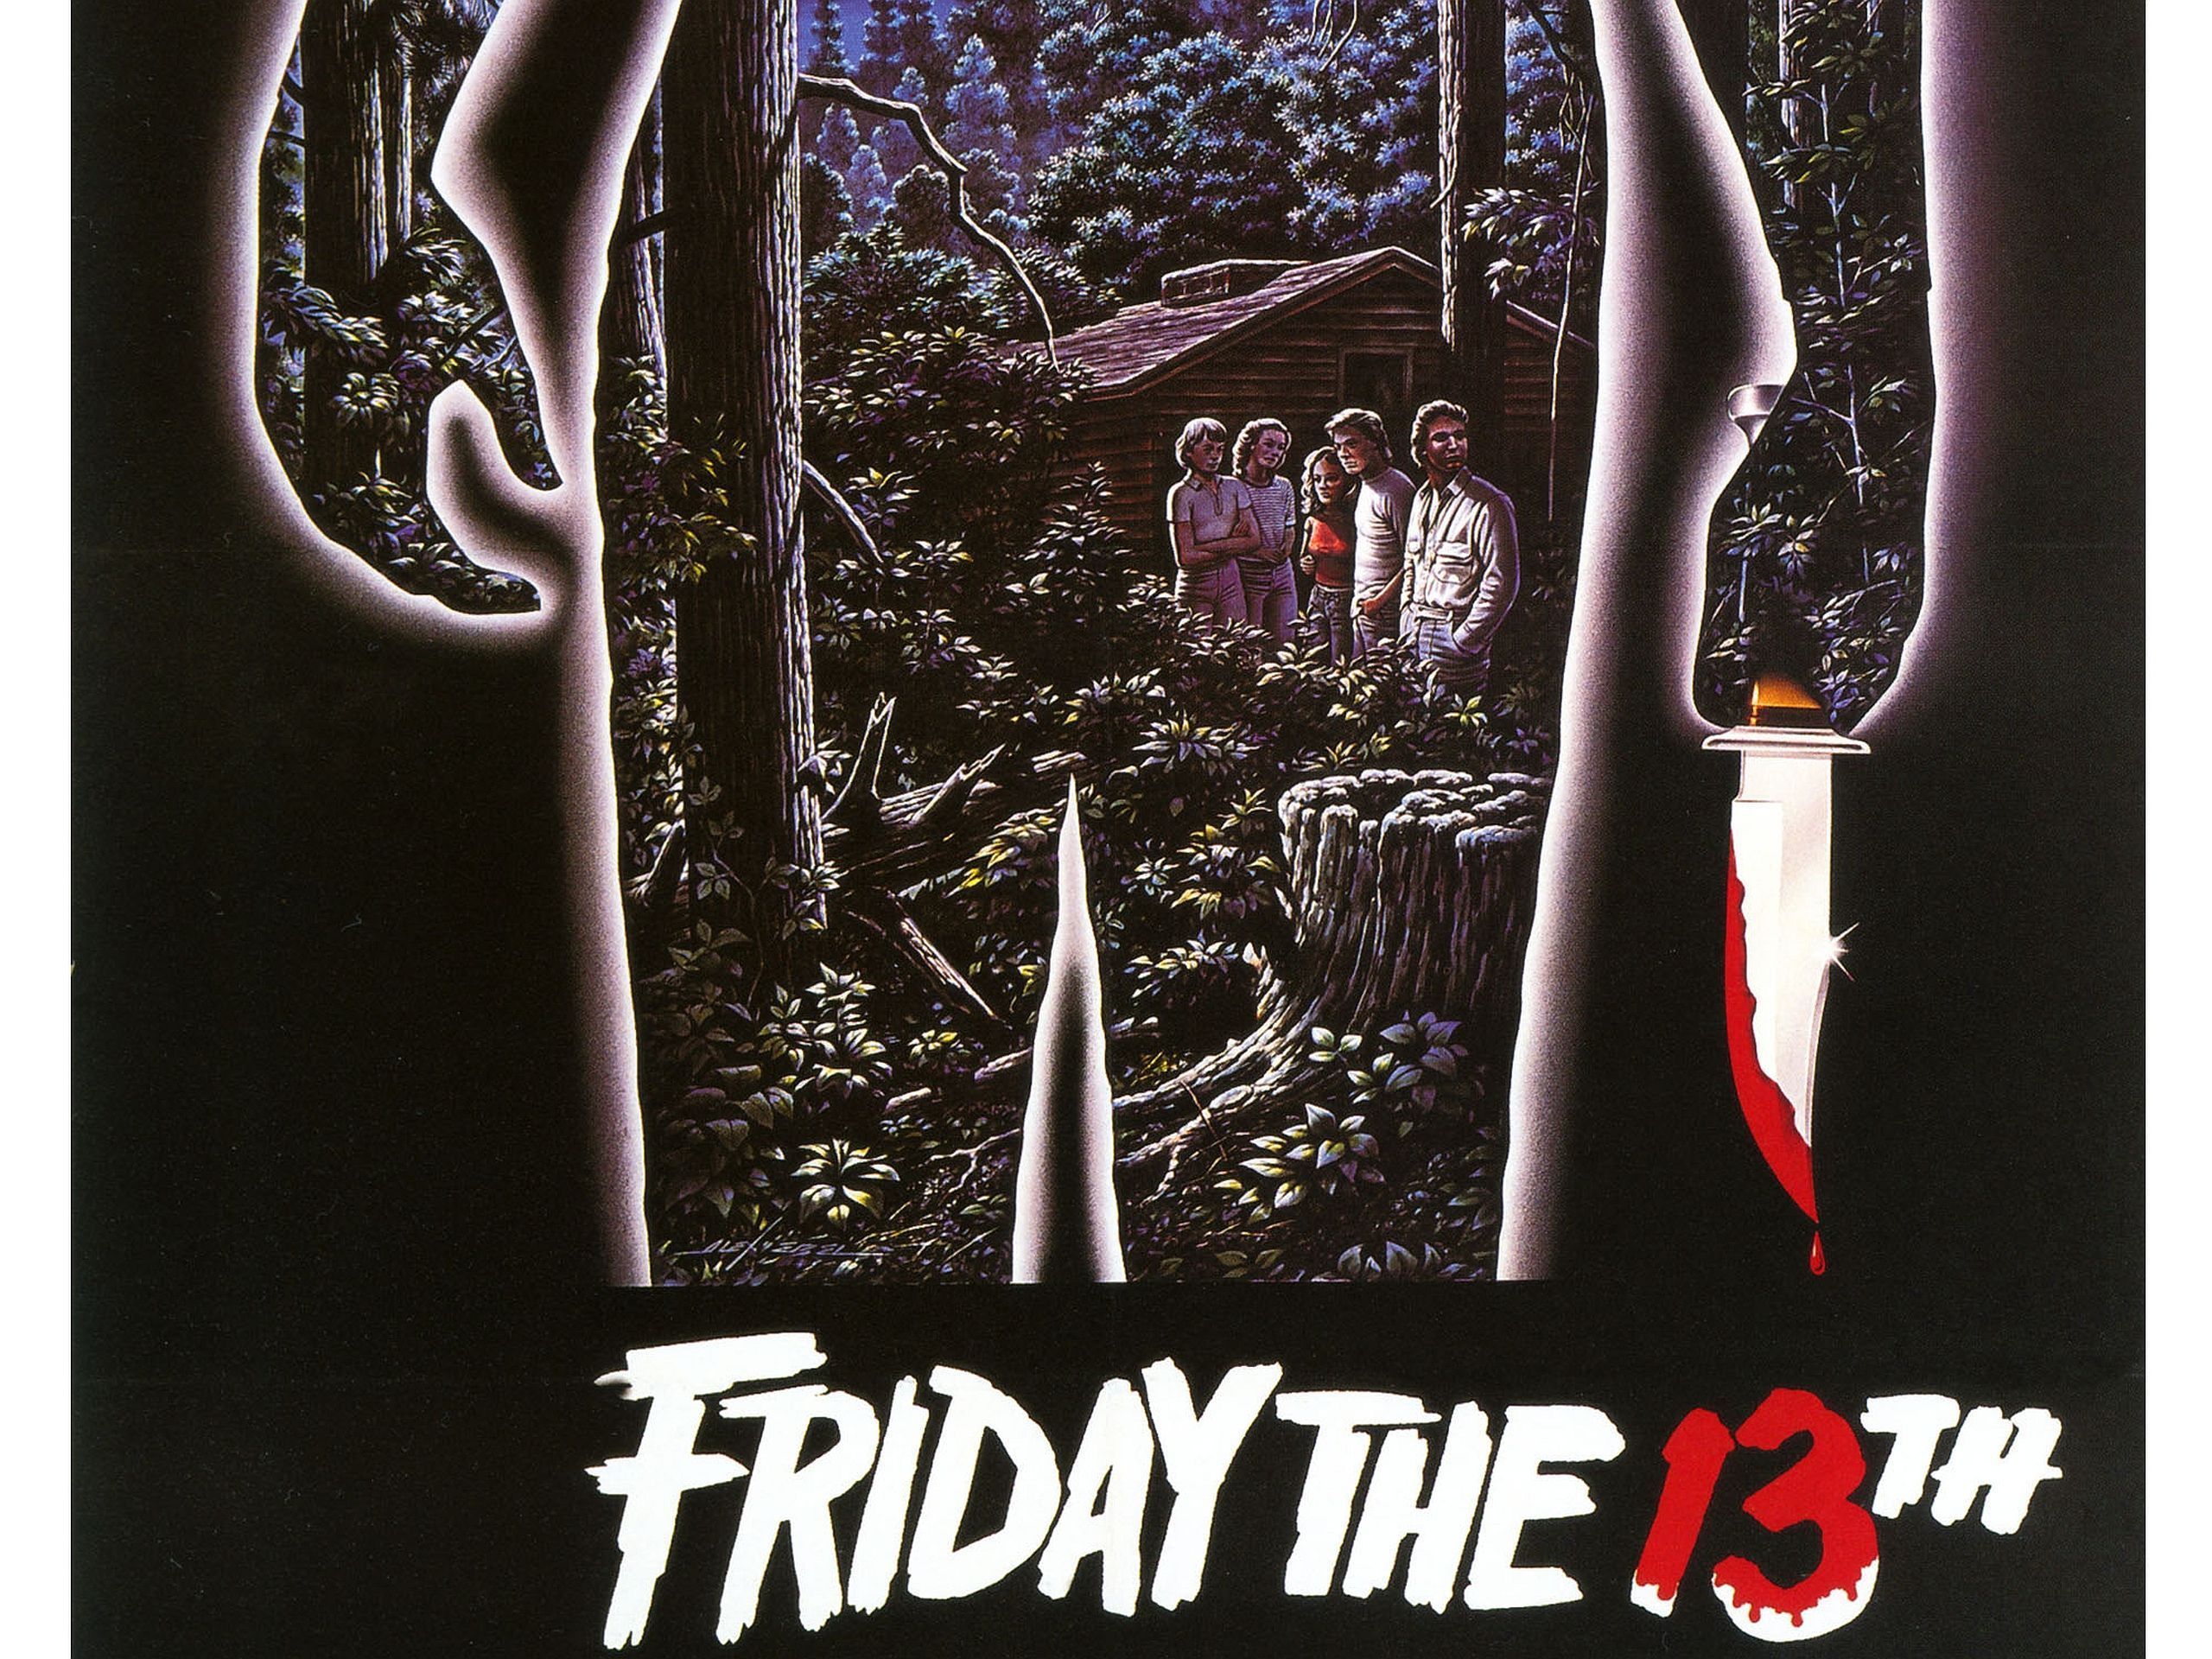 Friday the 13th Wallpaper the 13th Wallpaper 36487601